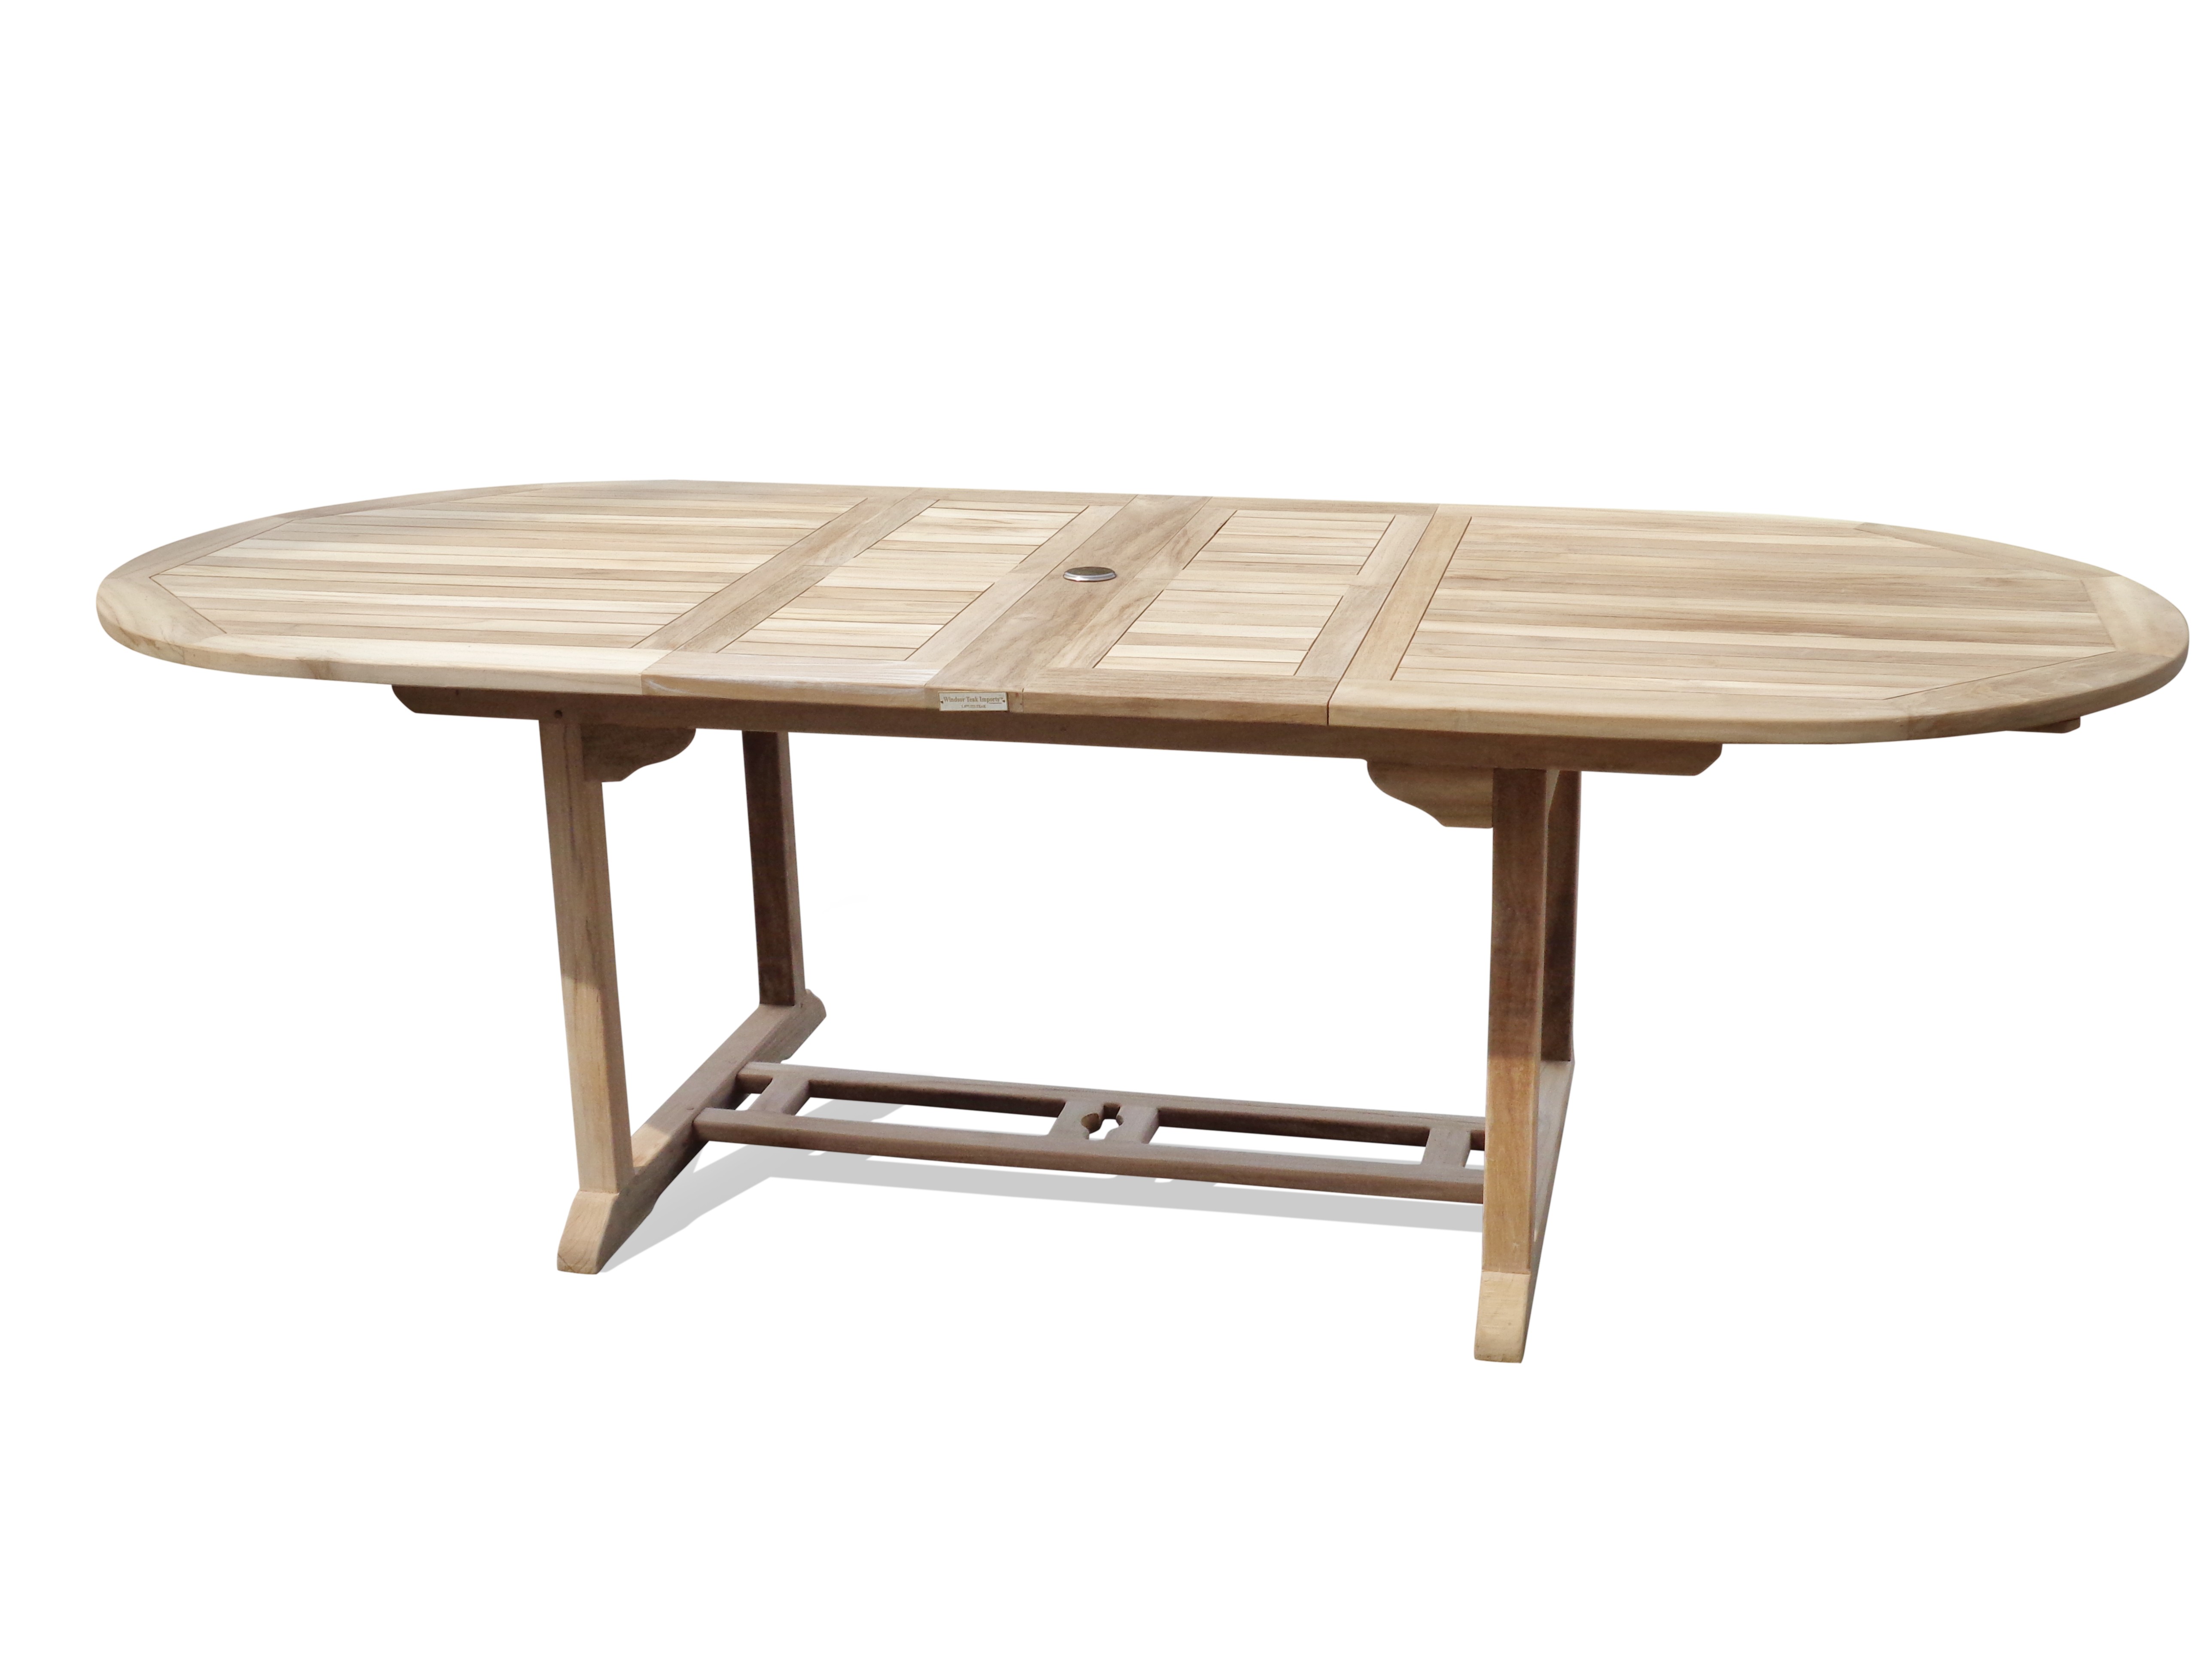 Buckingham 108" x 39" Oval Double Leaf Teak Extension Table...Seats 12...makes 3 Different Size Tables